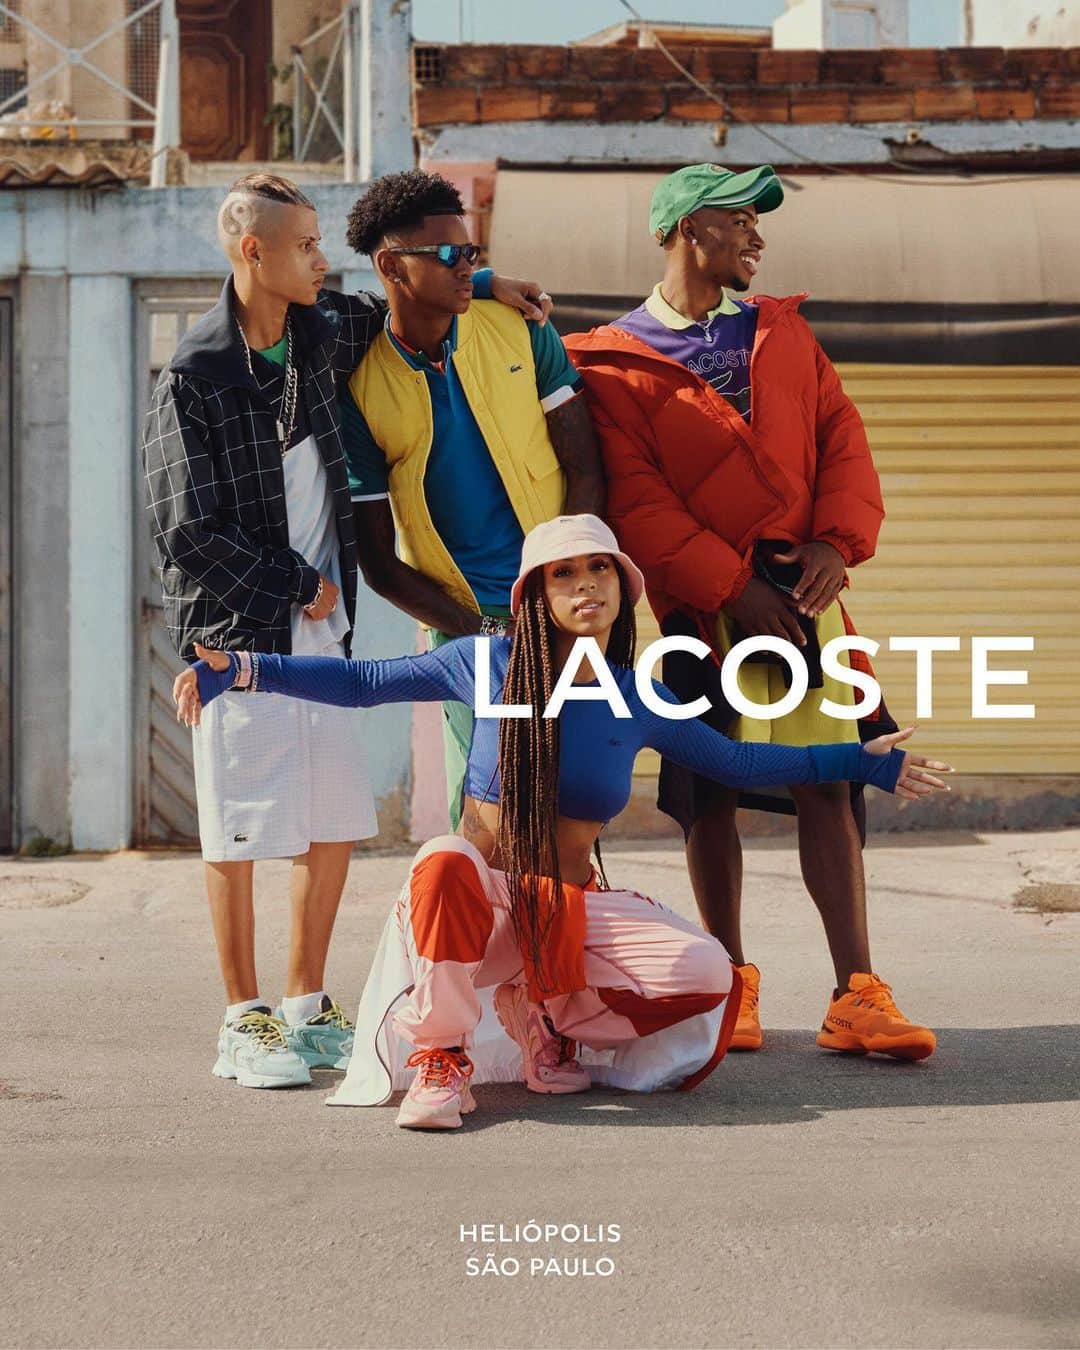 Lacosteのインスタグラム：「Moving with the world for 90 years - the Crocodile has been a rallying sign for plenty of people around the world. 🌎 Lacosteiros community from Brazil 🇧🇷 meet Japanese vintage lovers 🇯🇵 in an impossible encounter.  Their common ground? Creativity. All under the sign of the Crocodile. 🐊 #LacosteCelebrates90」